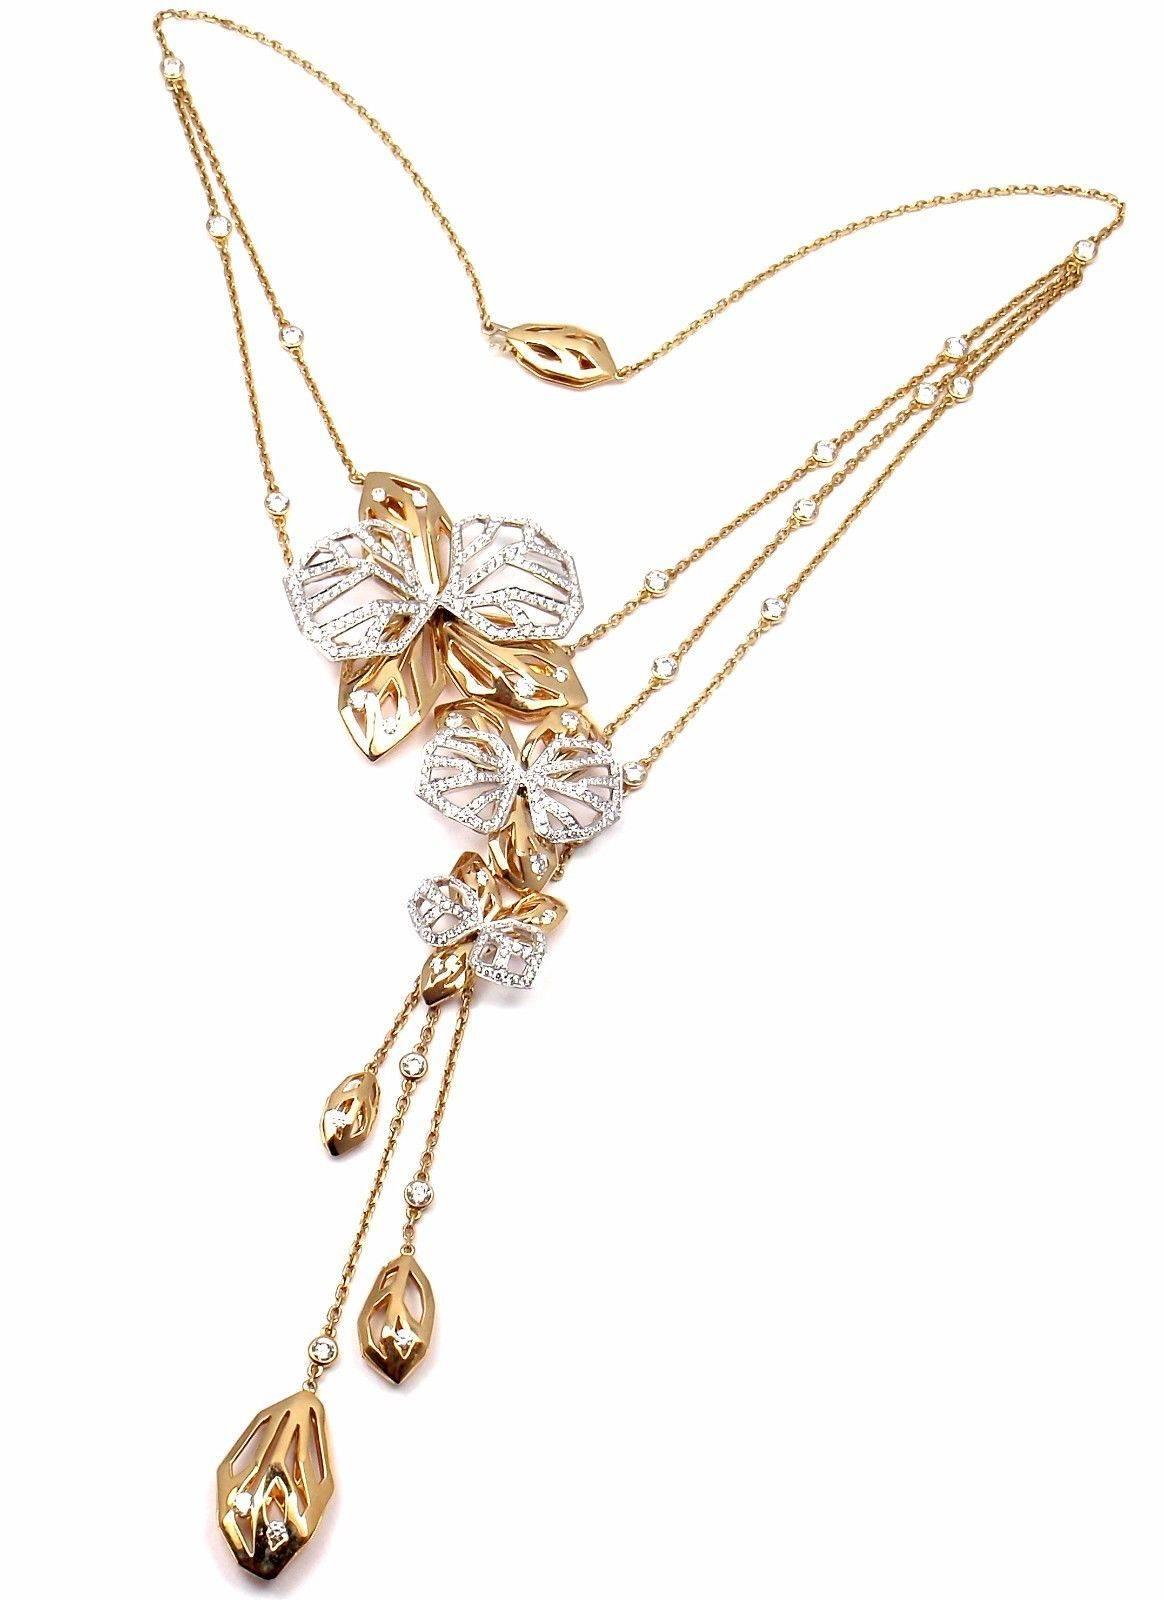 18k White And Yellow Gold Diamond Caresse D'orchidées Orchid Flower Necklace by Cartier. 
With 325 Round Brilliant Cut Diamonds VVS1 clarity, E color 
This necklace is in mint condition and it comes with original Cartier box and Cartier service